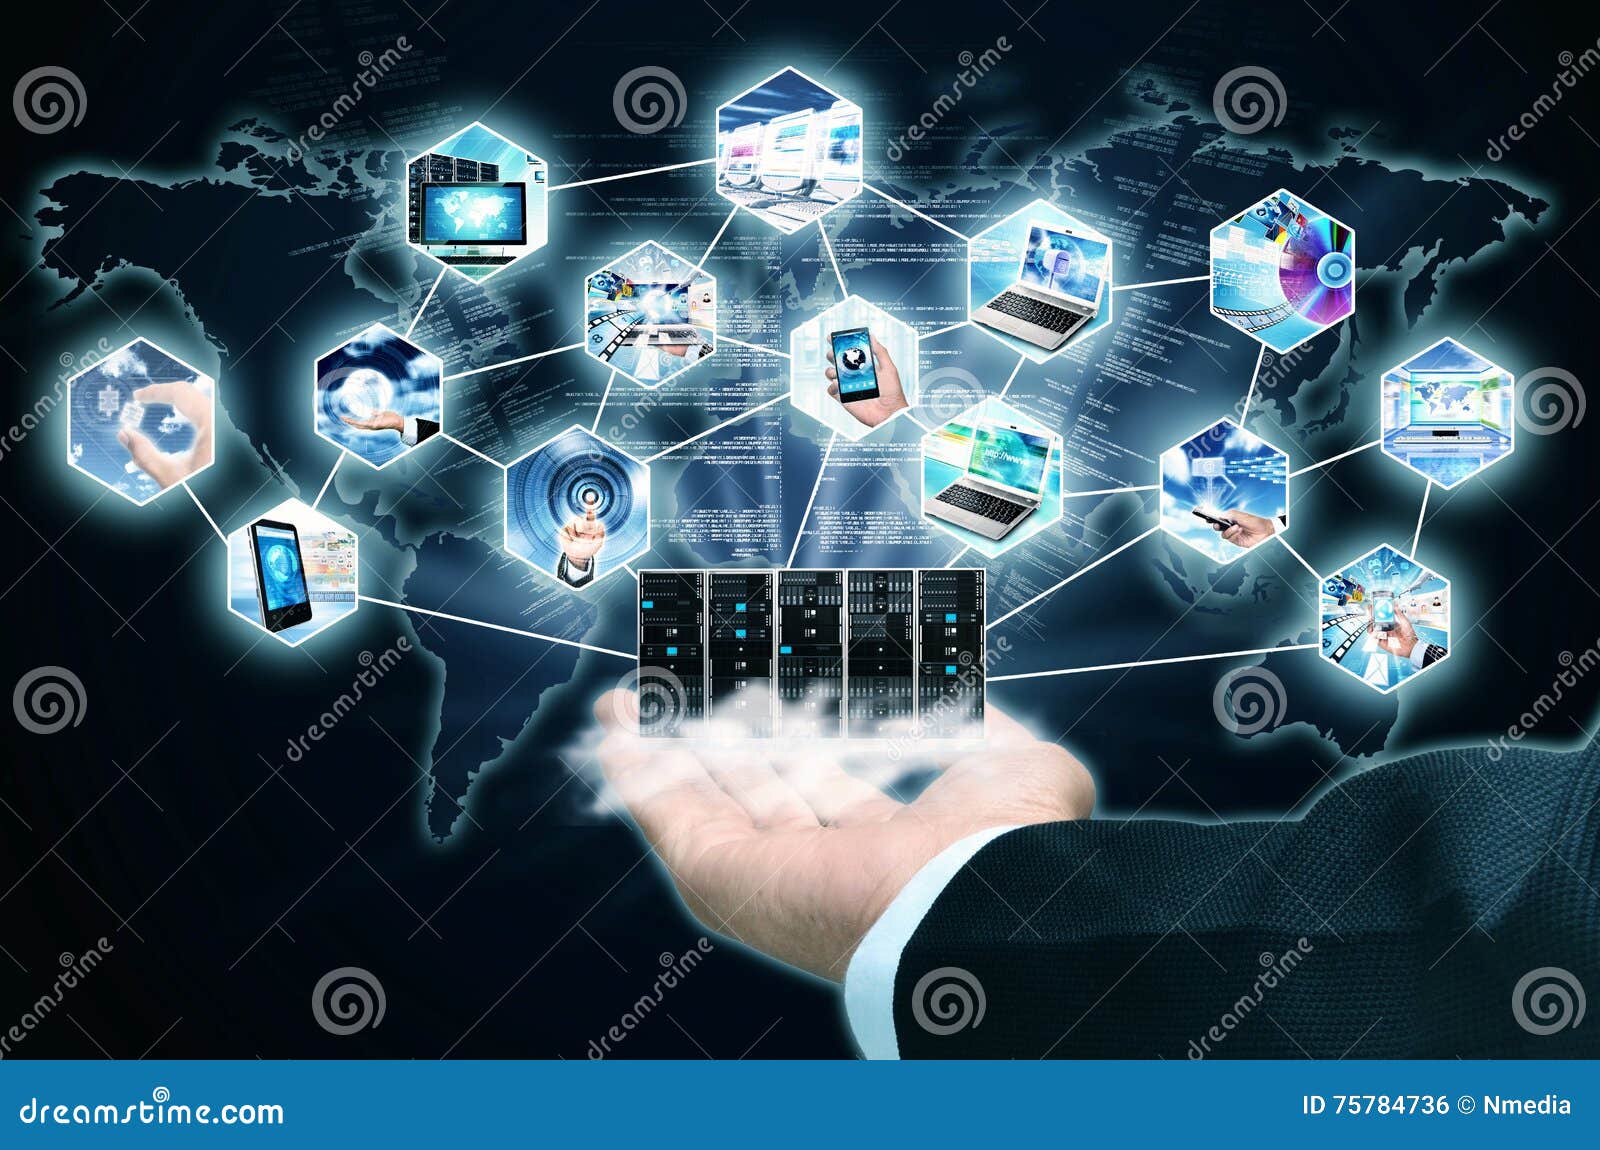 Information Technology Free Images - technology